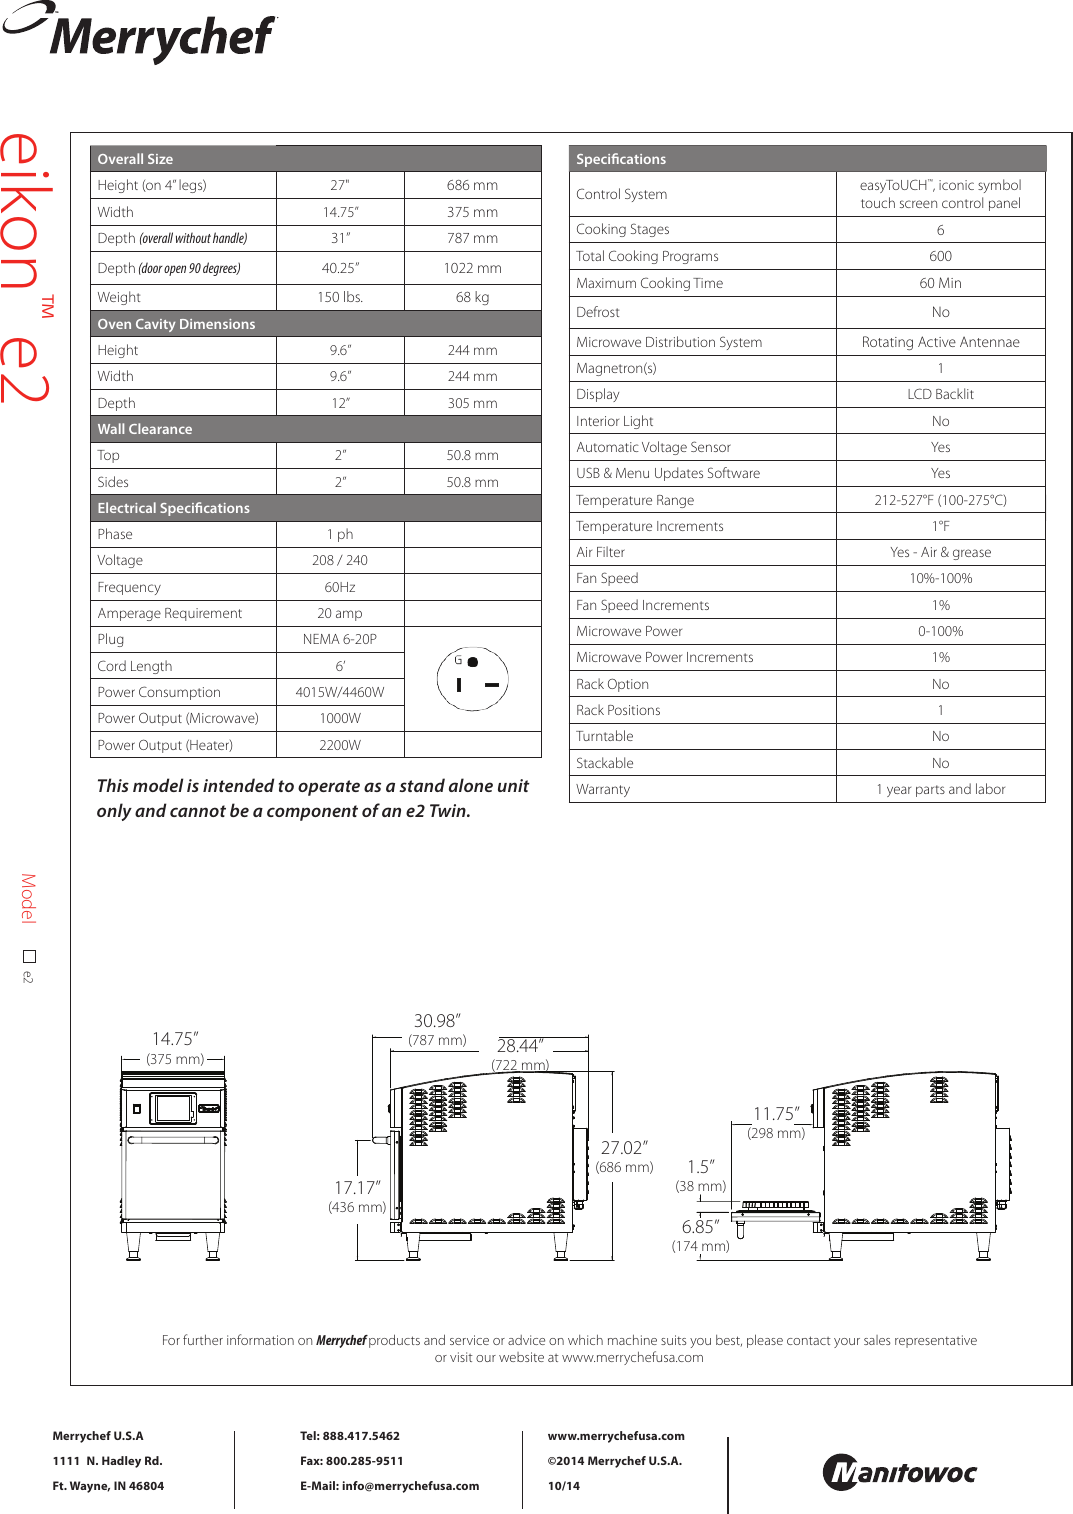 Page 2 of 2 - Merrychef Eikon E2 Spec-UL Approved_pg_2  Merrychef-eikon-e2-rapid-cook-oven